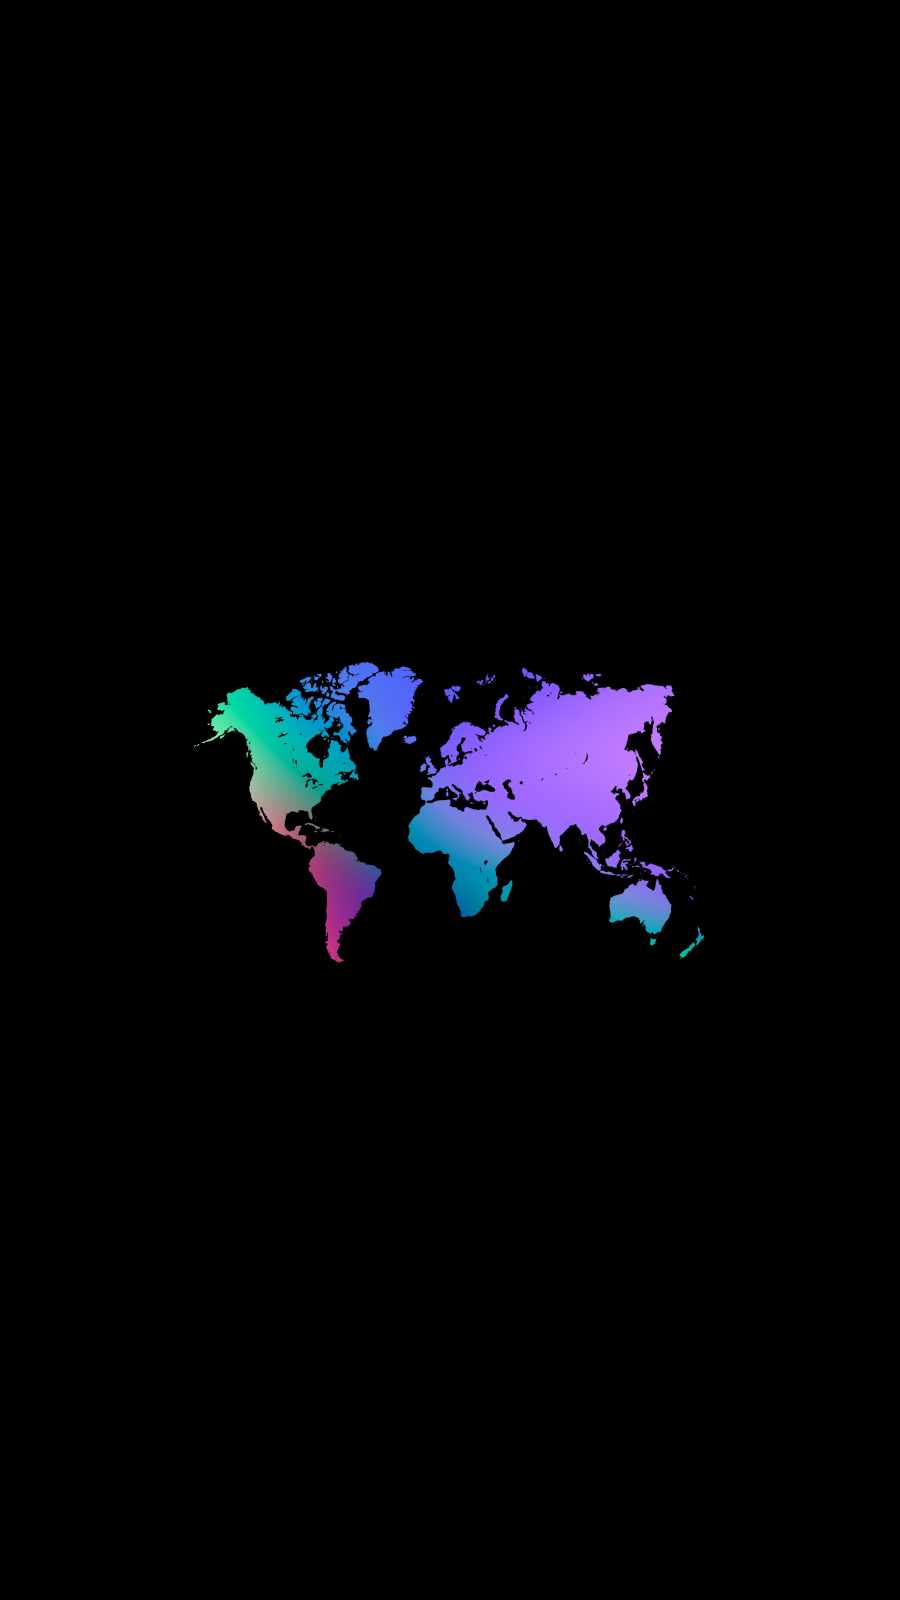 World Map Amoled - IPhone Wallpapers : iPhone Wallpapers